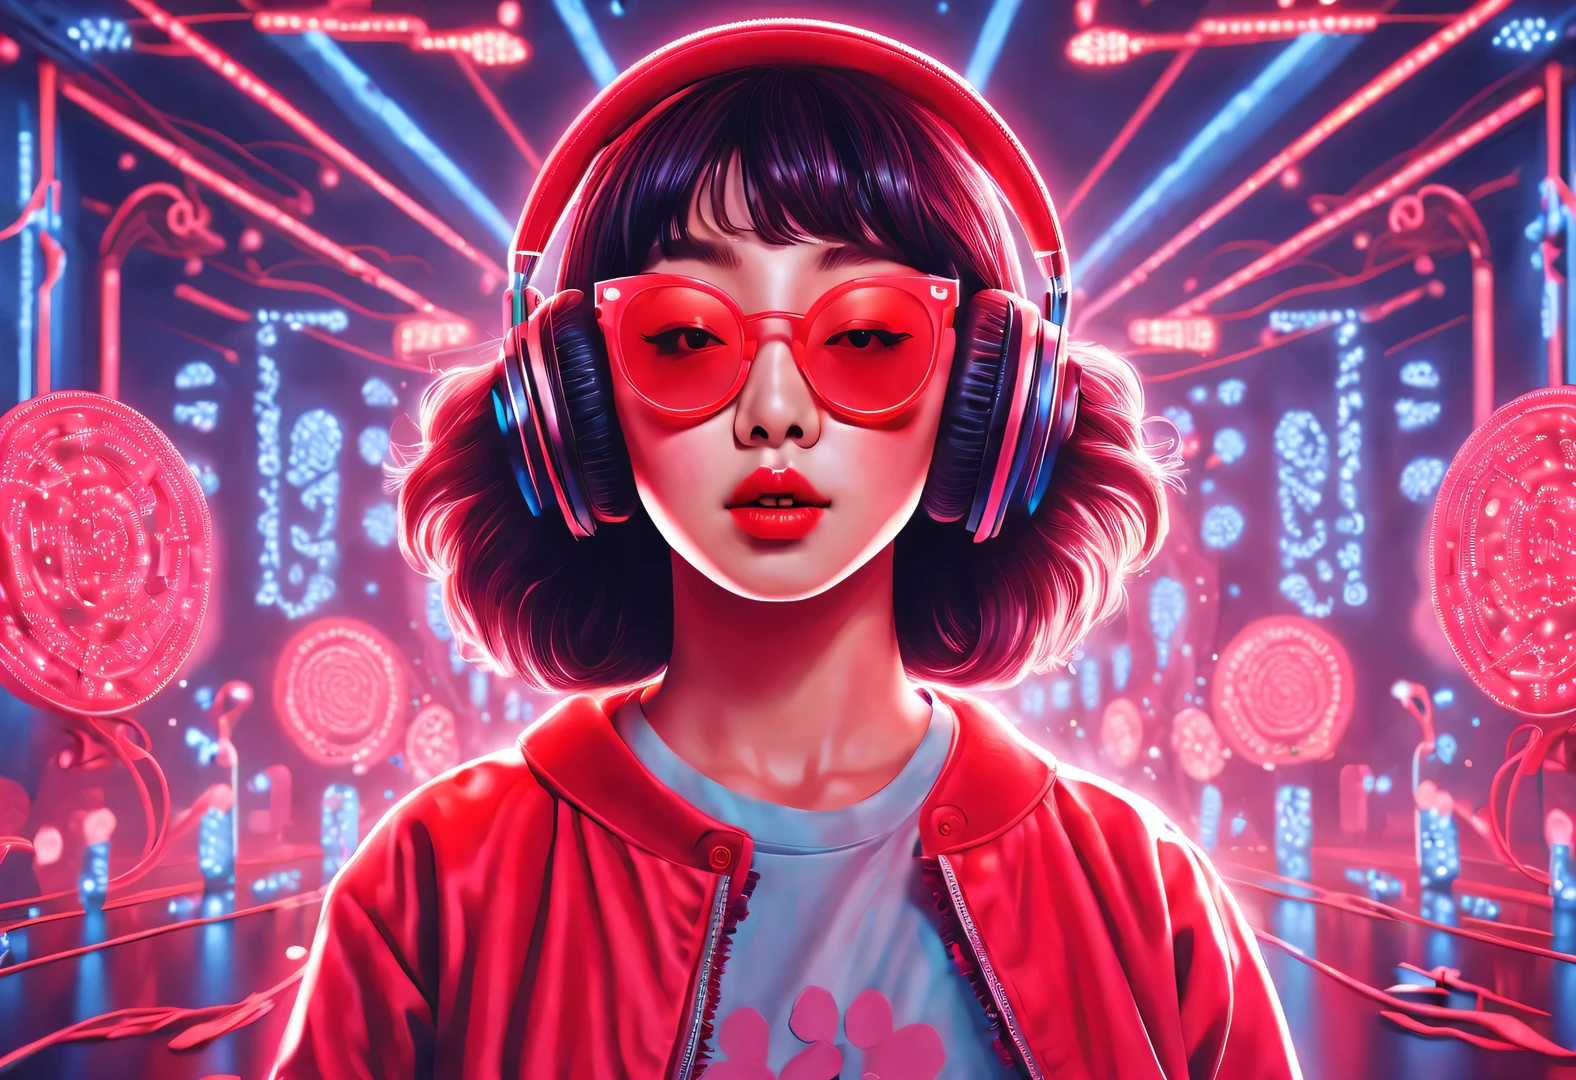 vaporwave style,Beautiful detailed,Vector illustration, Minimalism, digital illustration, Vector illustration，Minimalism，digital illustration，Hacker wearing sweatshirt and mask is working，T-shirt design，dramatic lighting，Art exhibition trends
，Award-winning，icon，Highly detailed cute lively Korean girl 18-year-old Shim Eun-kyung happily singing loudly in front of a super huge LED screen），（）holding a microphone），Jumping pose，dynamic action，inspired by《strange her》，Shen Eun-kyung combed her hair into a slightly curly baby style，Very fair skin，There are two charming dimples on both cheeks，Wearing a red embroidered lace dress，background：LED screen, dramatic lighting, 

